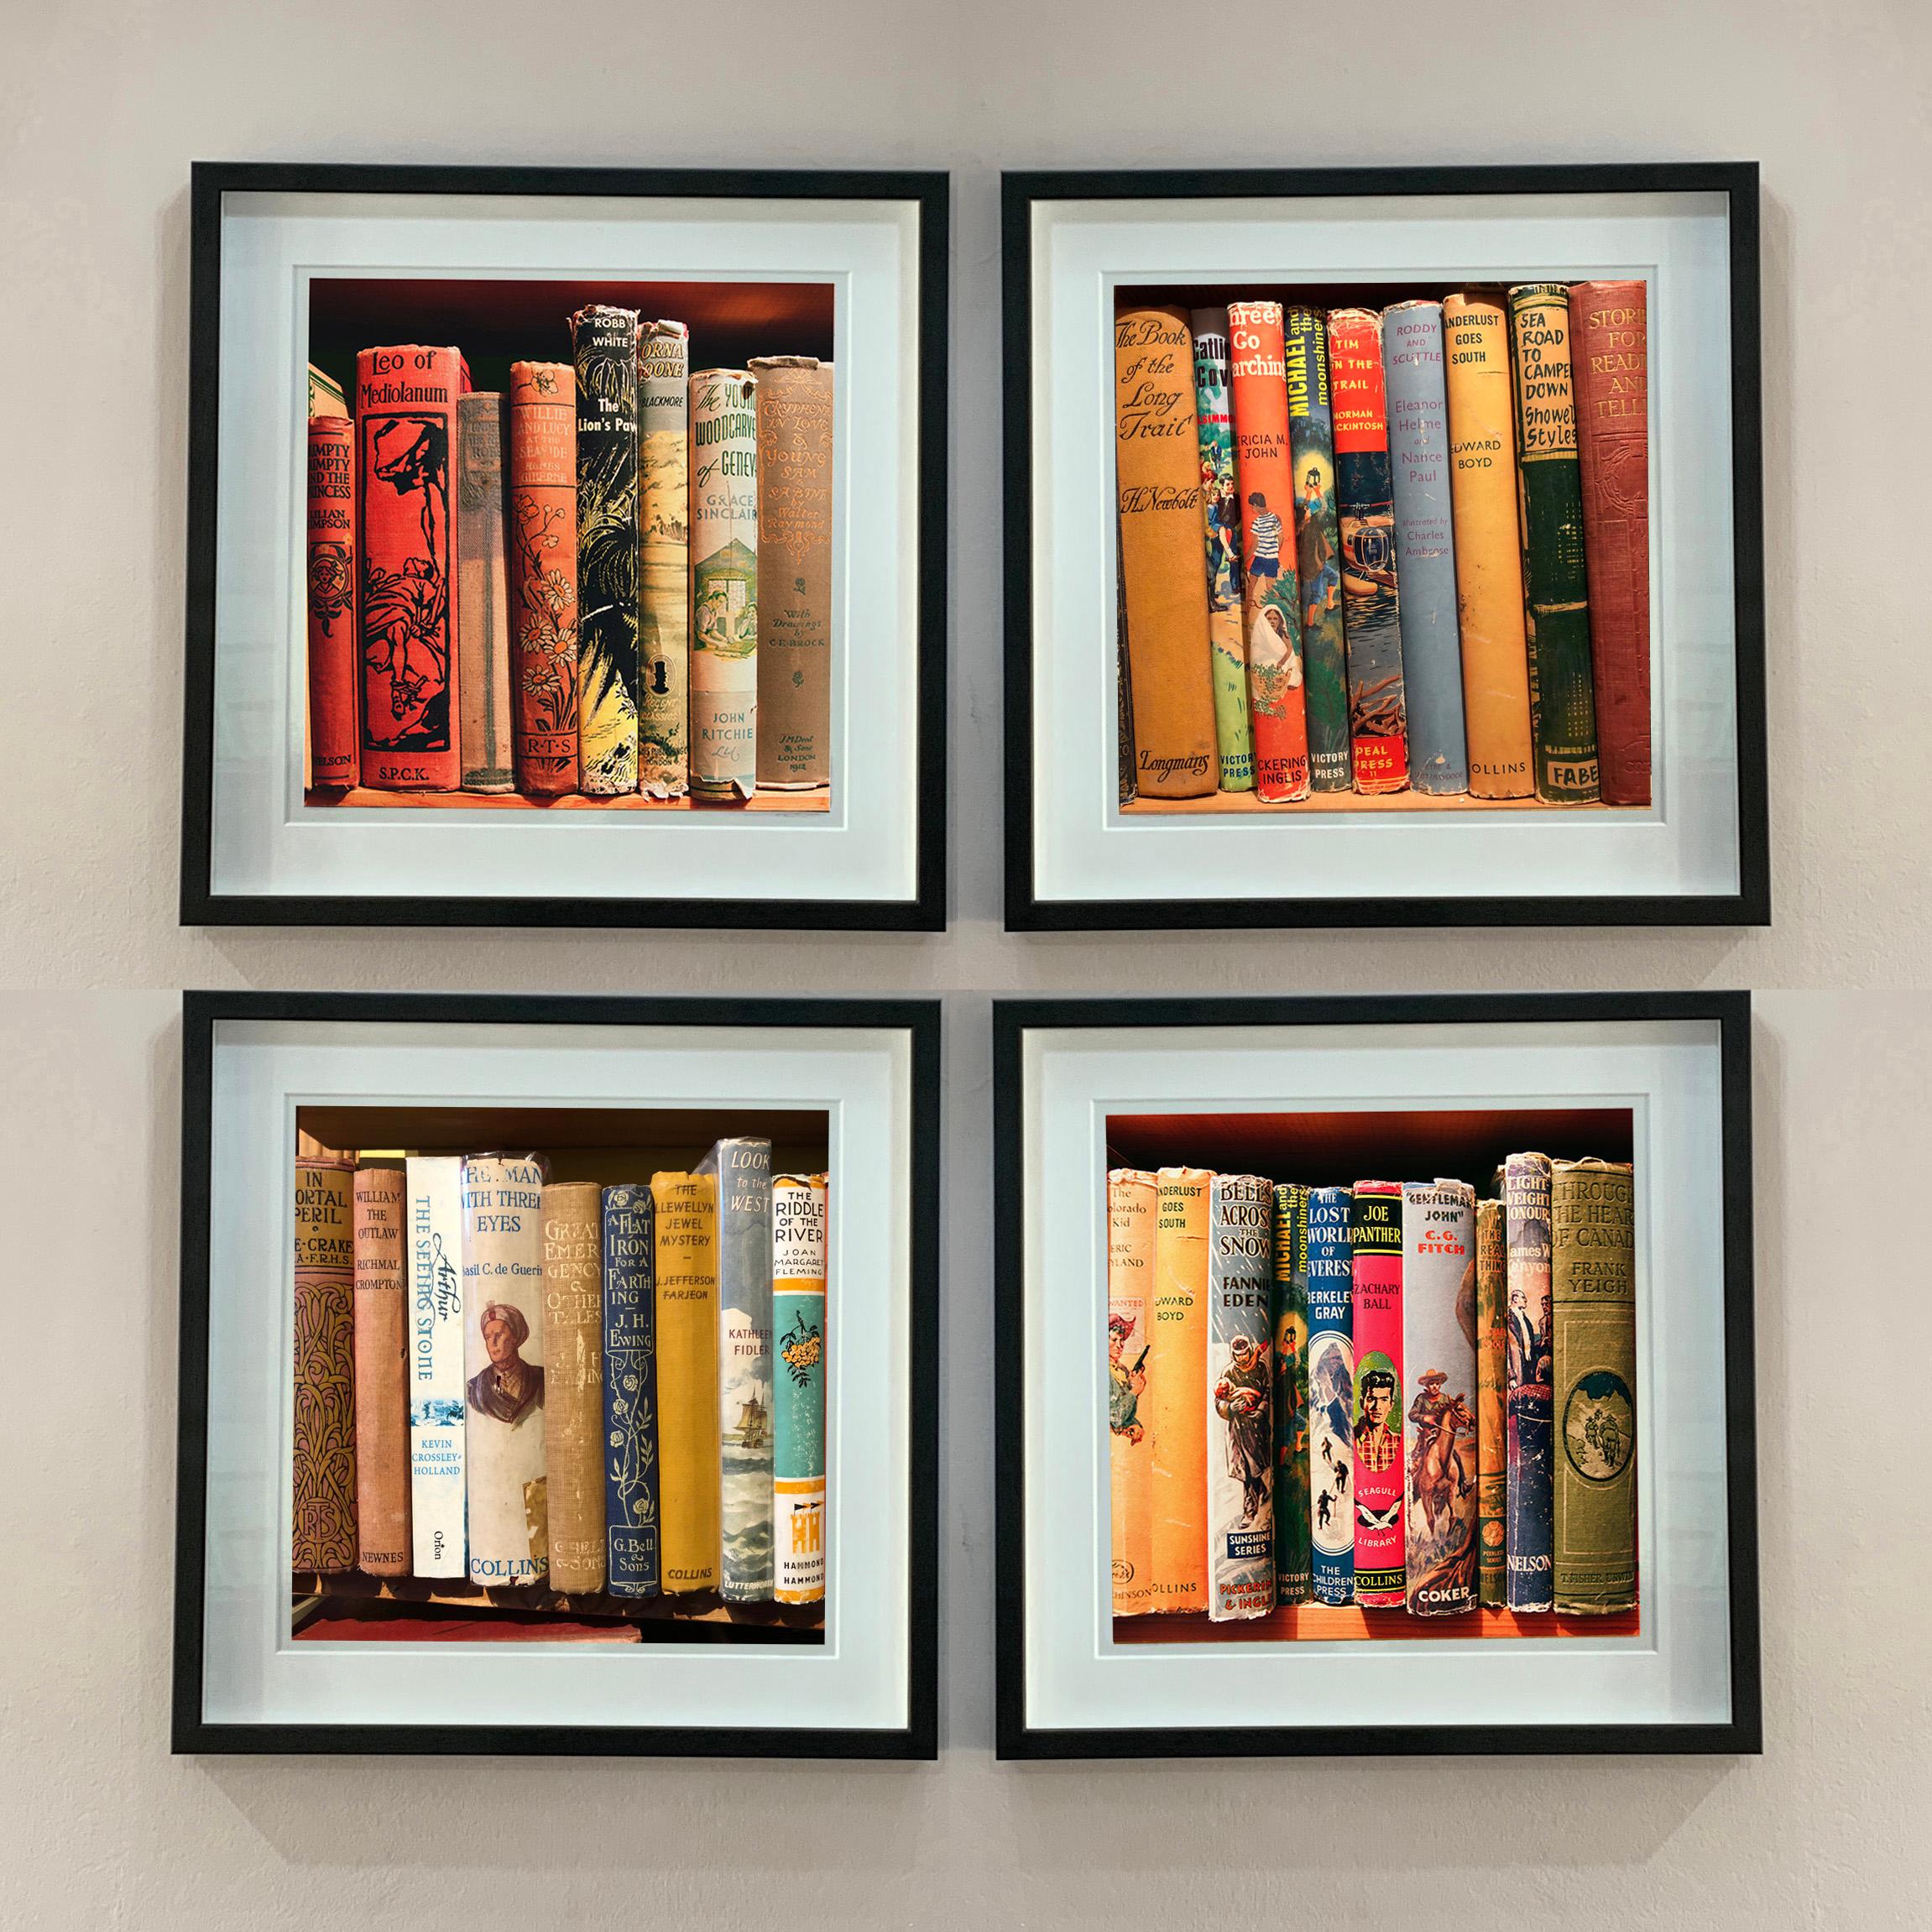 Riddle of the River, features a collection of vintage book spines on a shelf in a photograph by Richard Heeps from his series In The Treasure Trove. Taken in a secondhand bookshop in Norfolk, the linear pattern is a signature style of Richard's, the